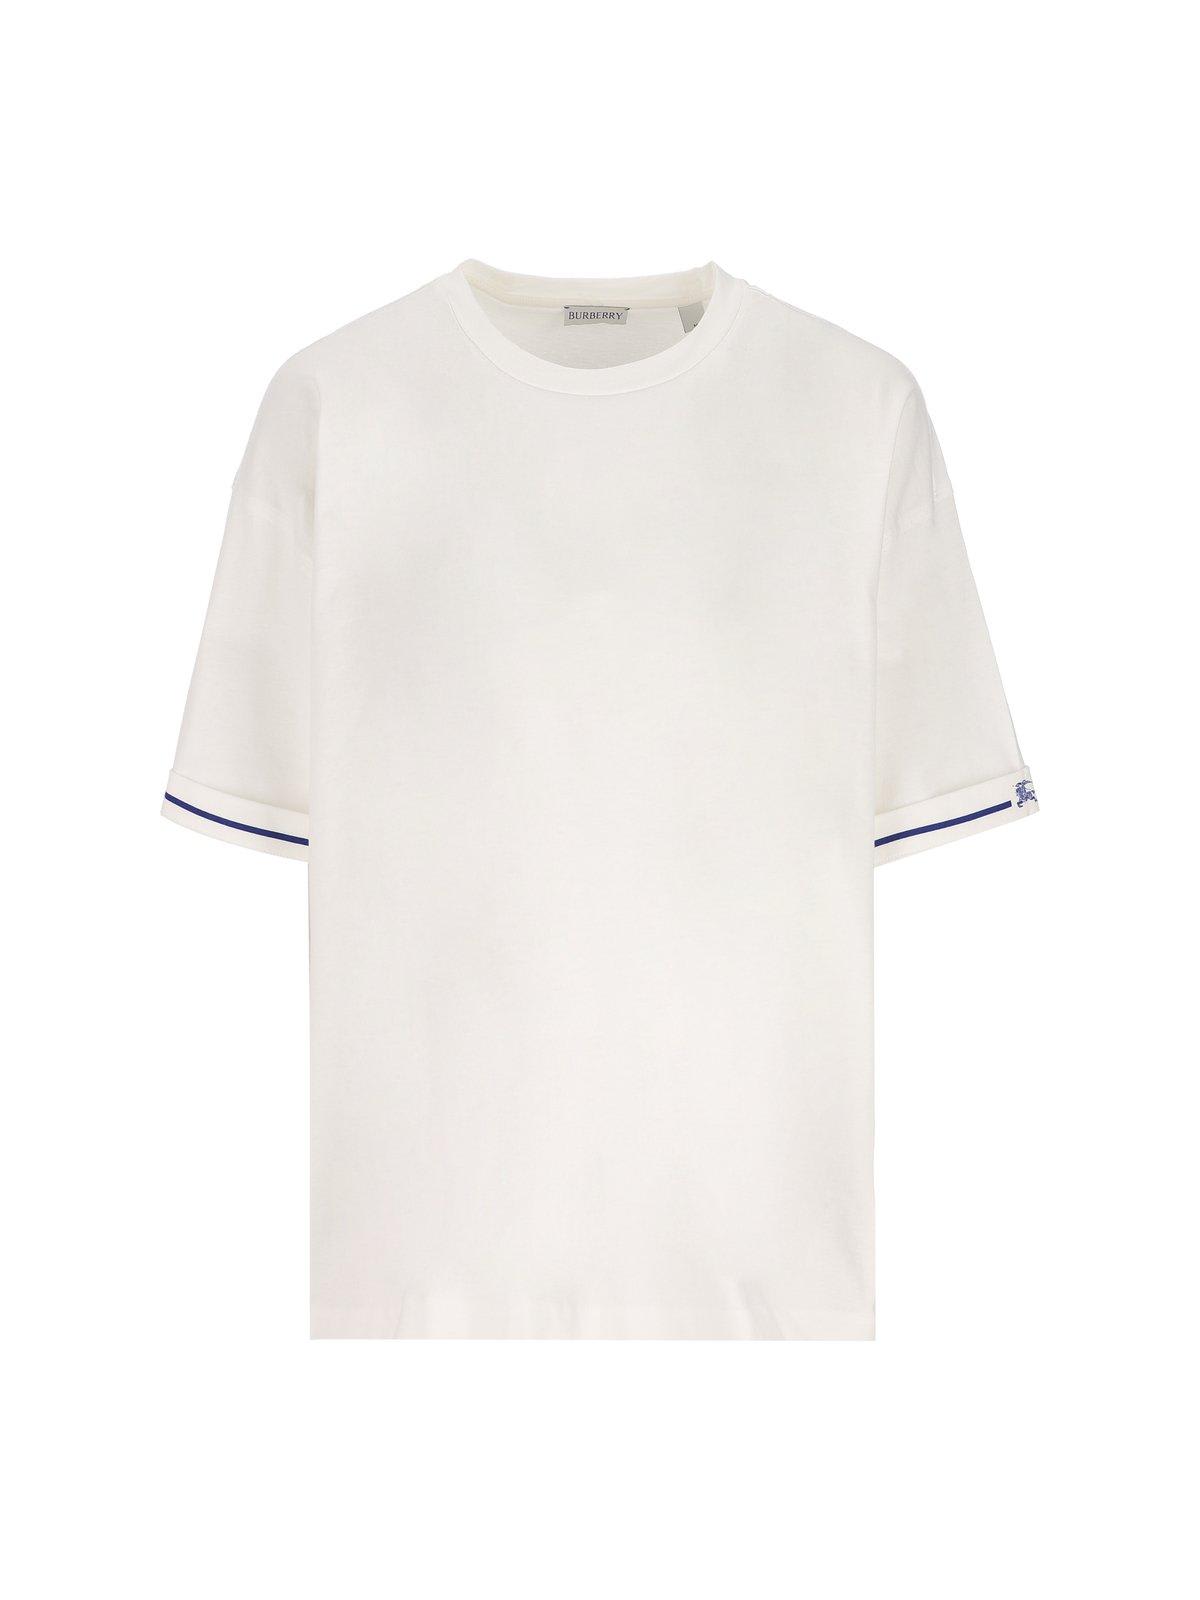 Shop Burberry Logo Embroidered Crewneck T-shirt In White